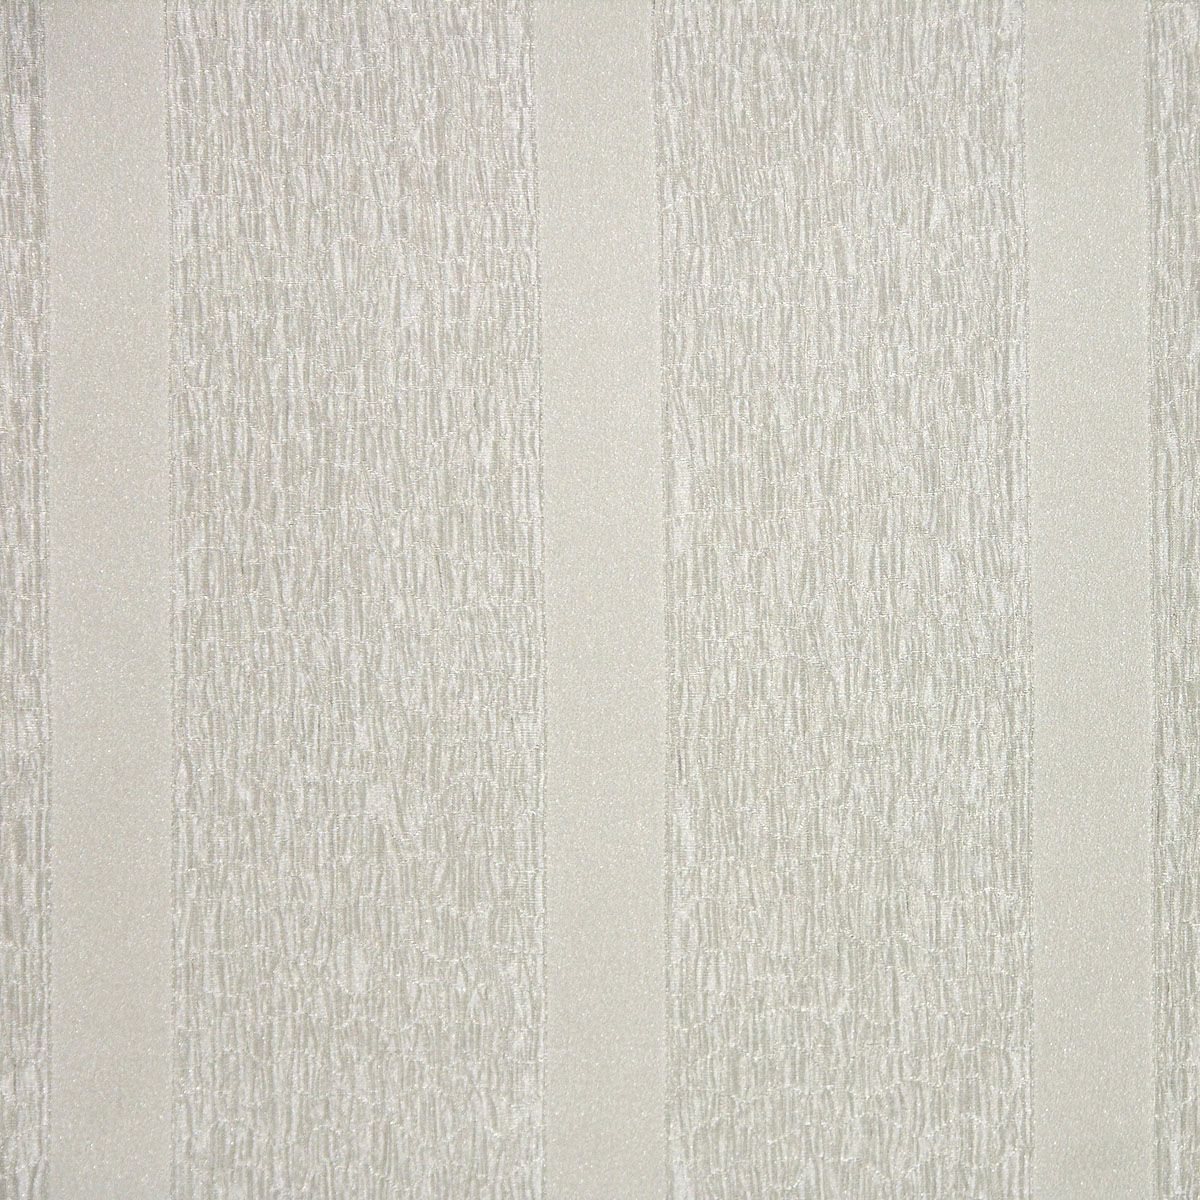 Salmerina fabric in beige color - pattern number SB 00019464 - by Scalamandre in the Old World Weavers collection